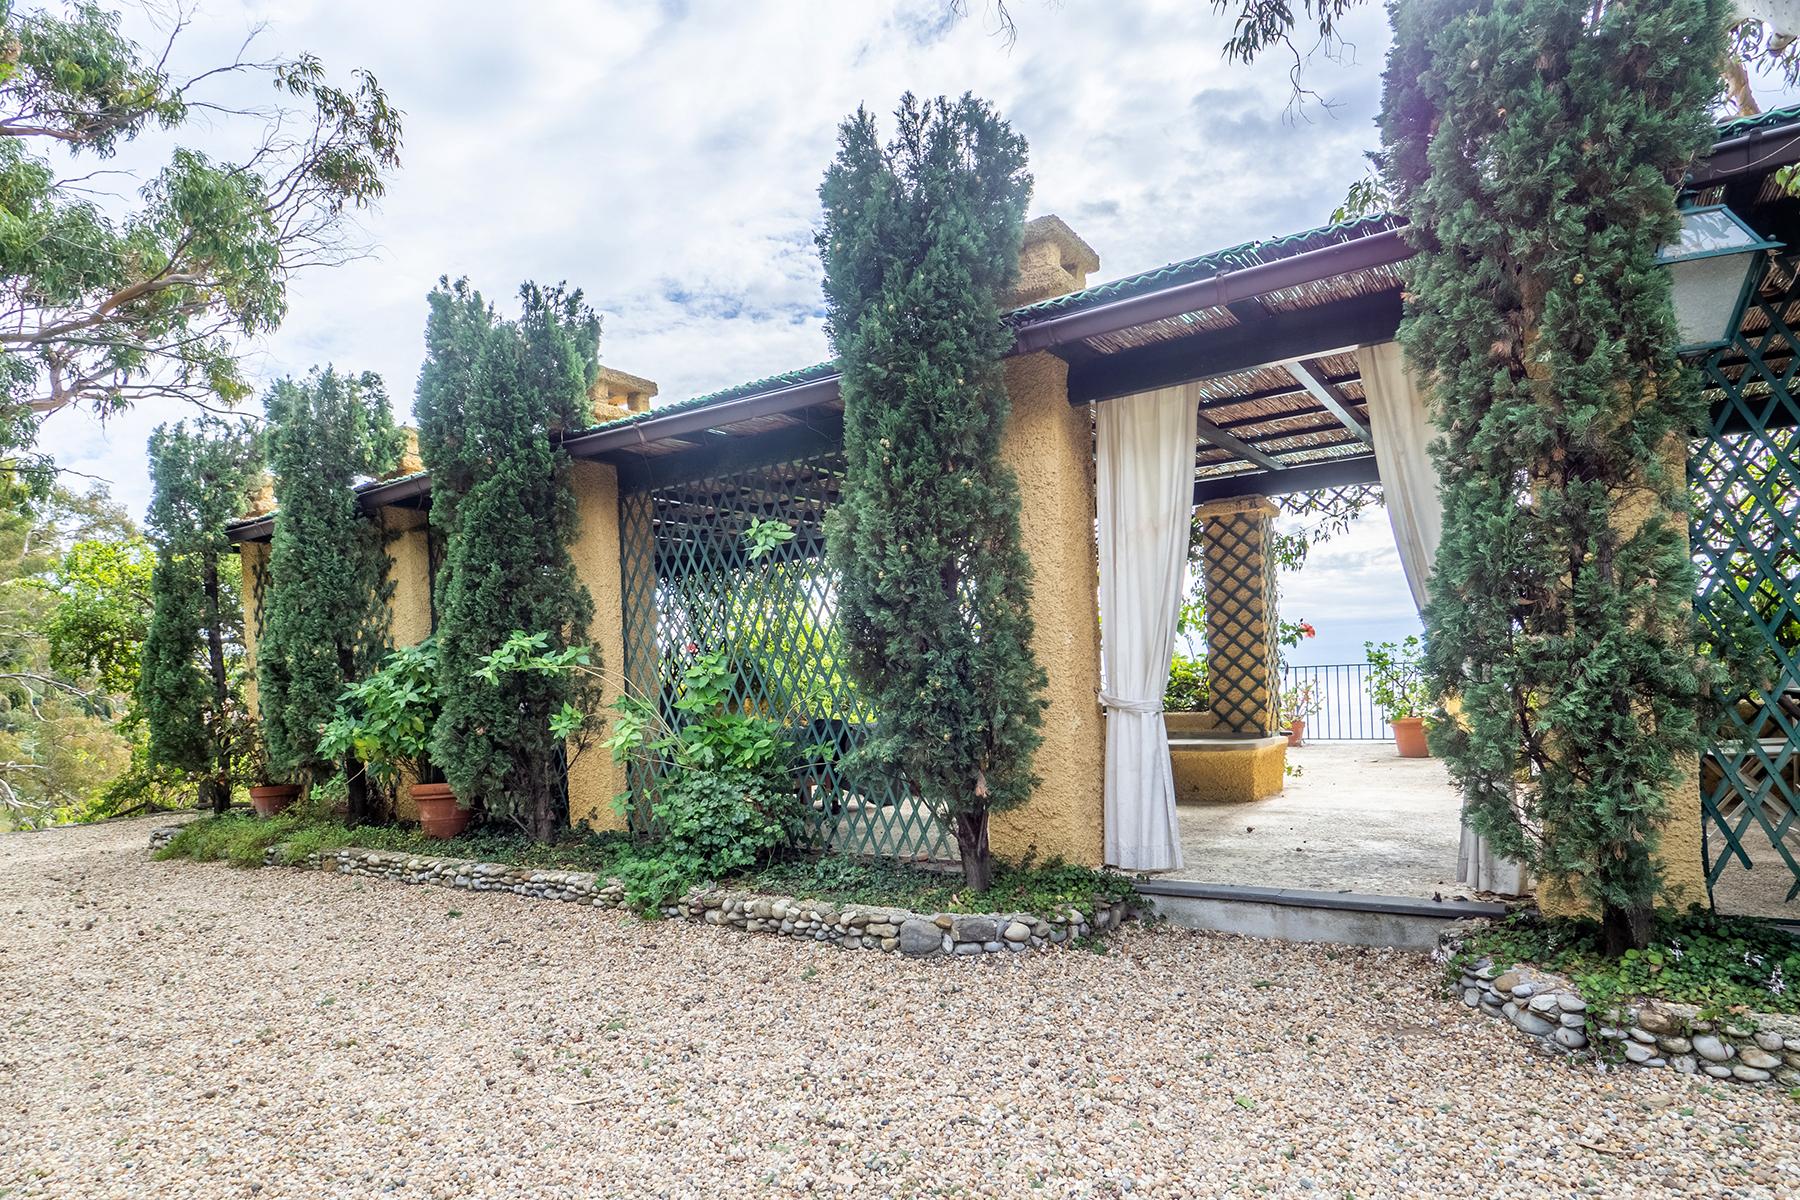 Semidetached historical villa with private access to the sea - 19